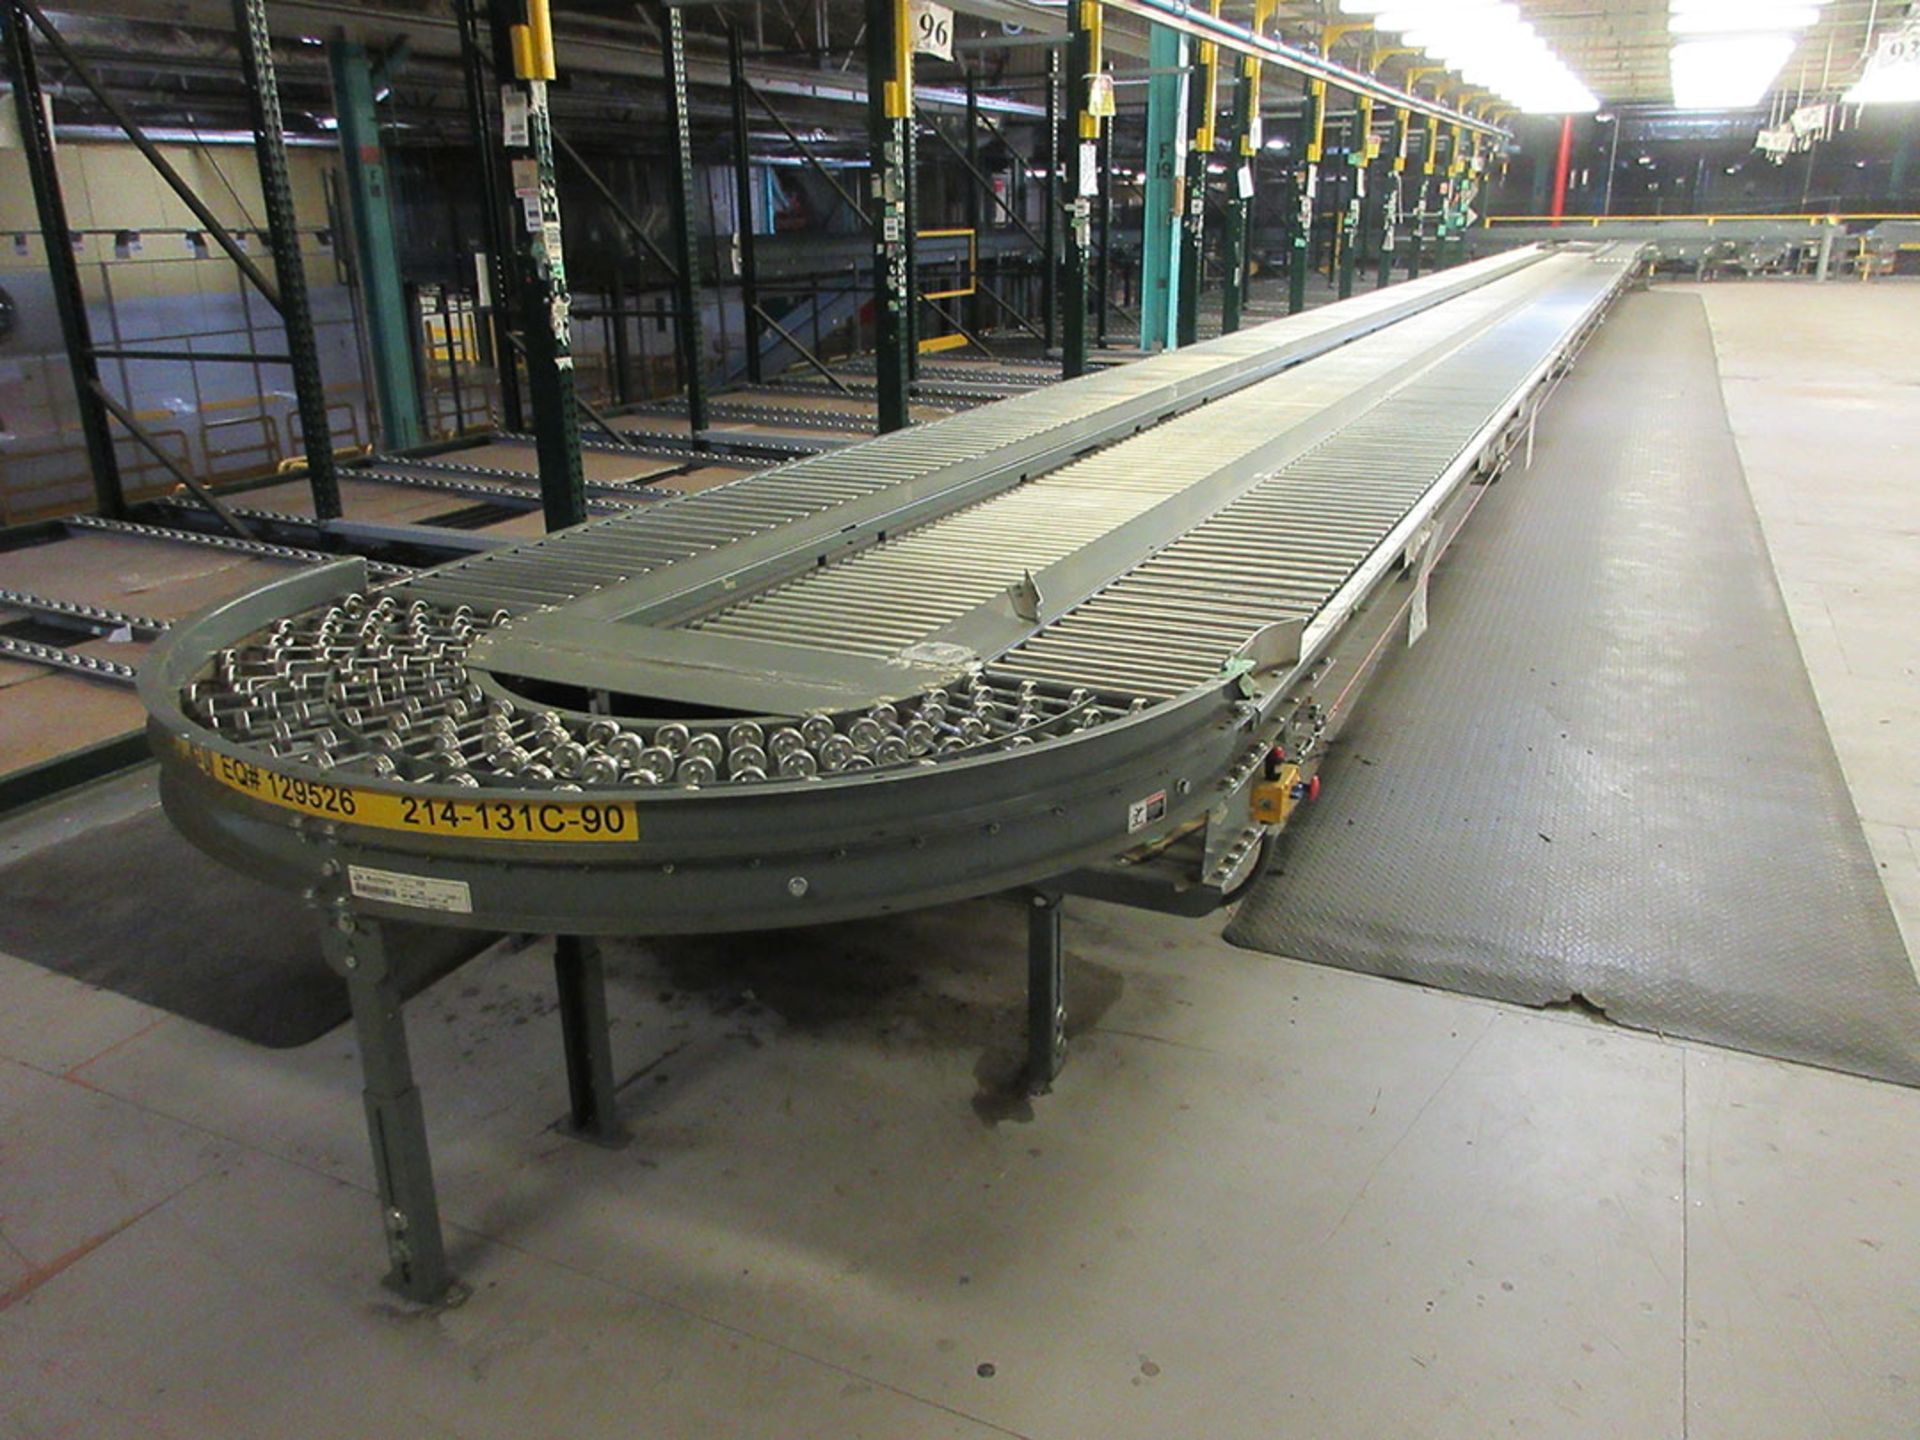 SOUTHERN SYSTEMS INDUSTRIAL CONVEYOR; LOCATED EAST SIDE MEZZANINE, APPROX., INCLUDES (3) INCLINES